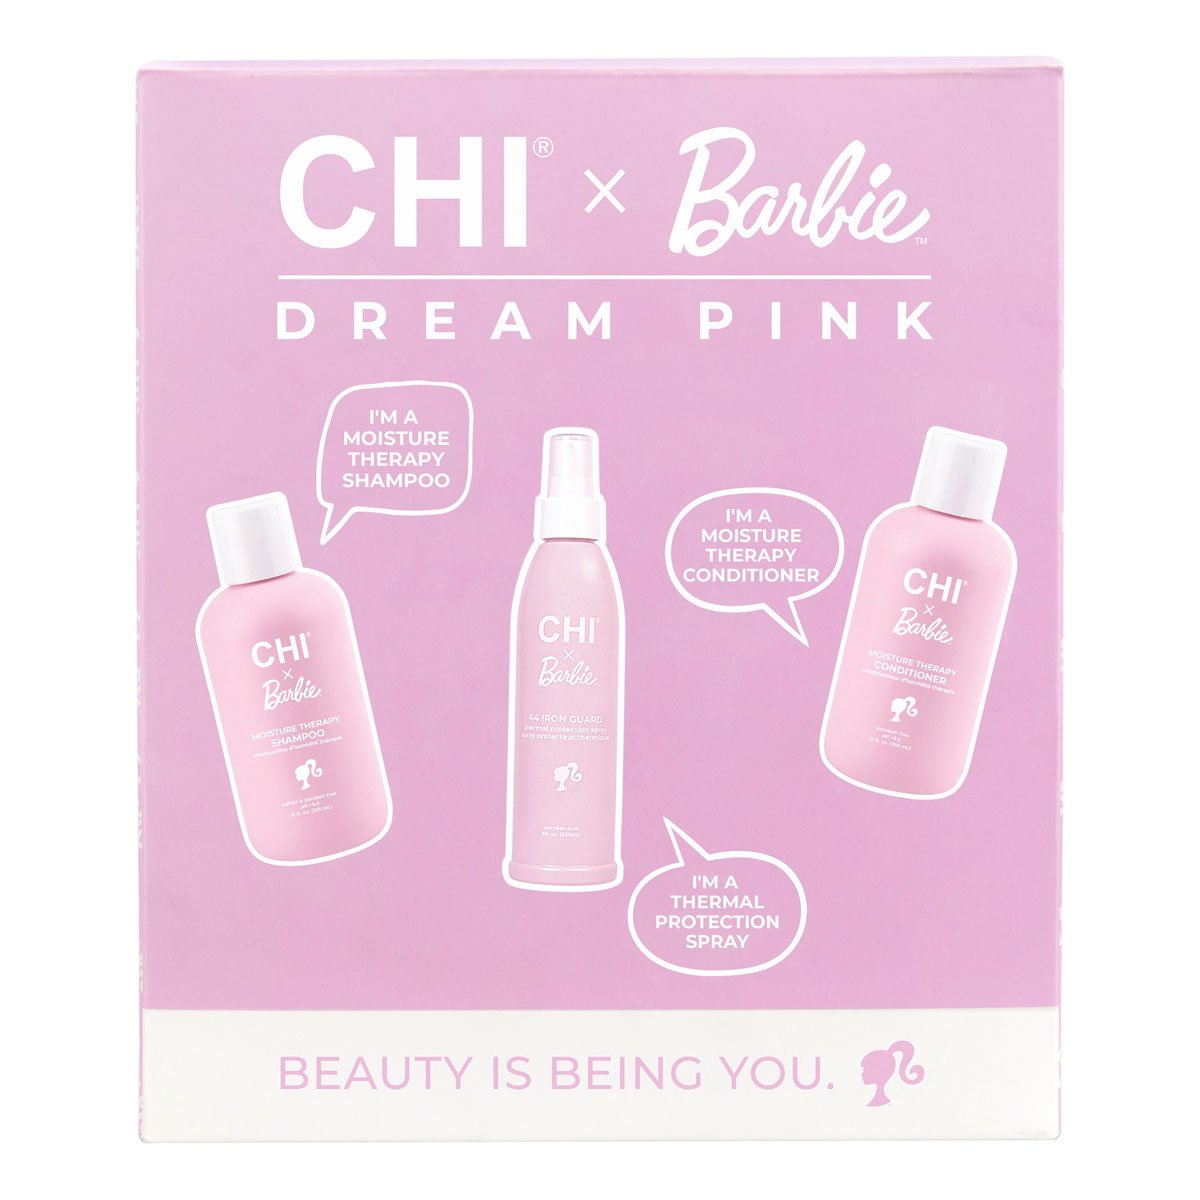 CHI x Barbie Dream Pink Haircare Kit